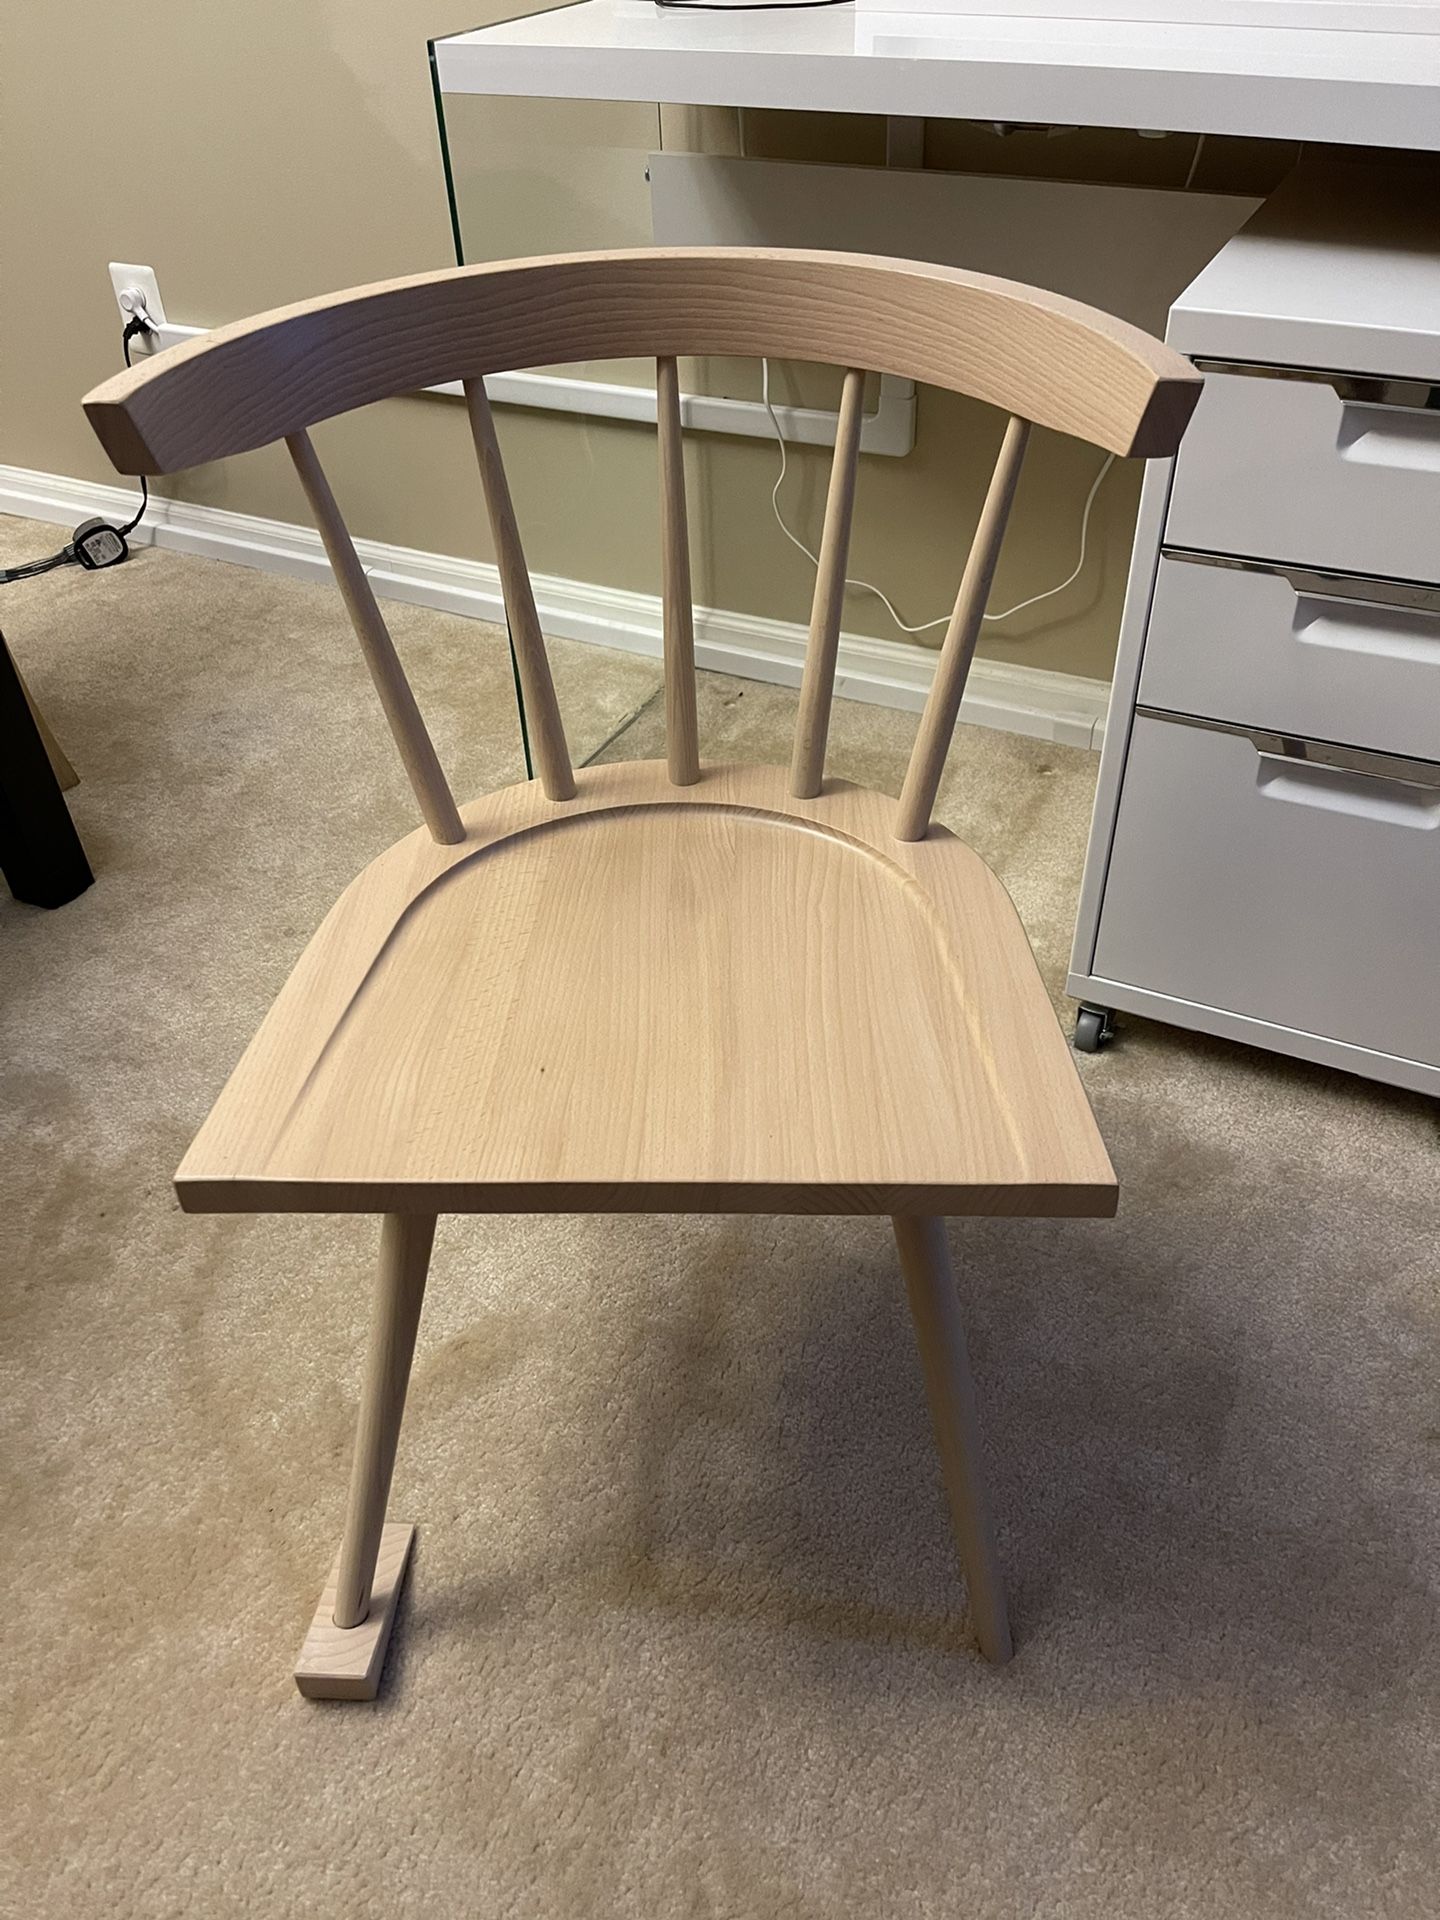 Virgil Abloh x Ikea Markerad Chair for Sale in Morgan Hill, CA - OfferUp